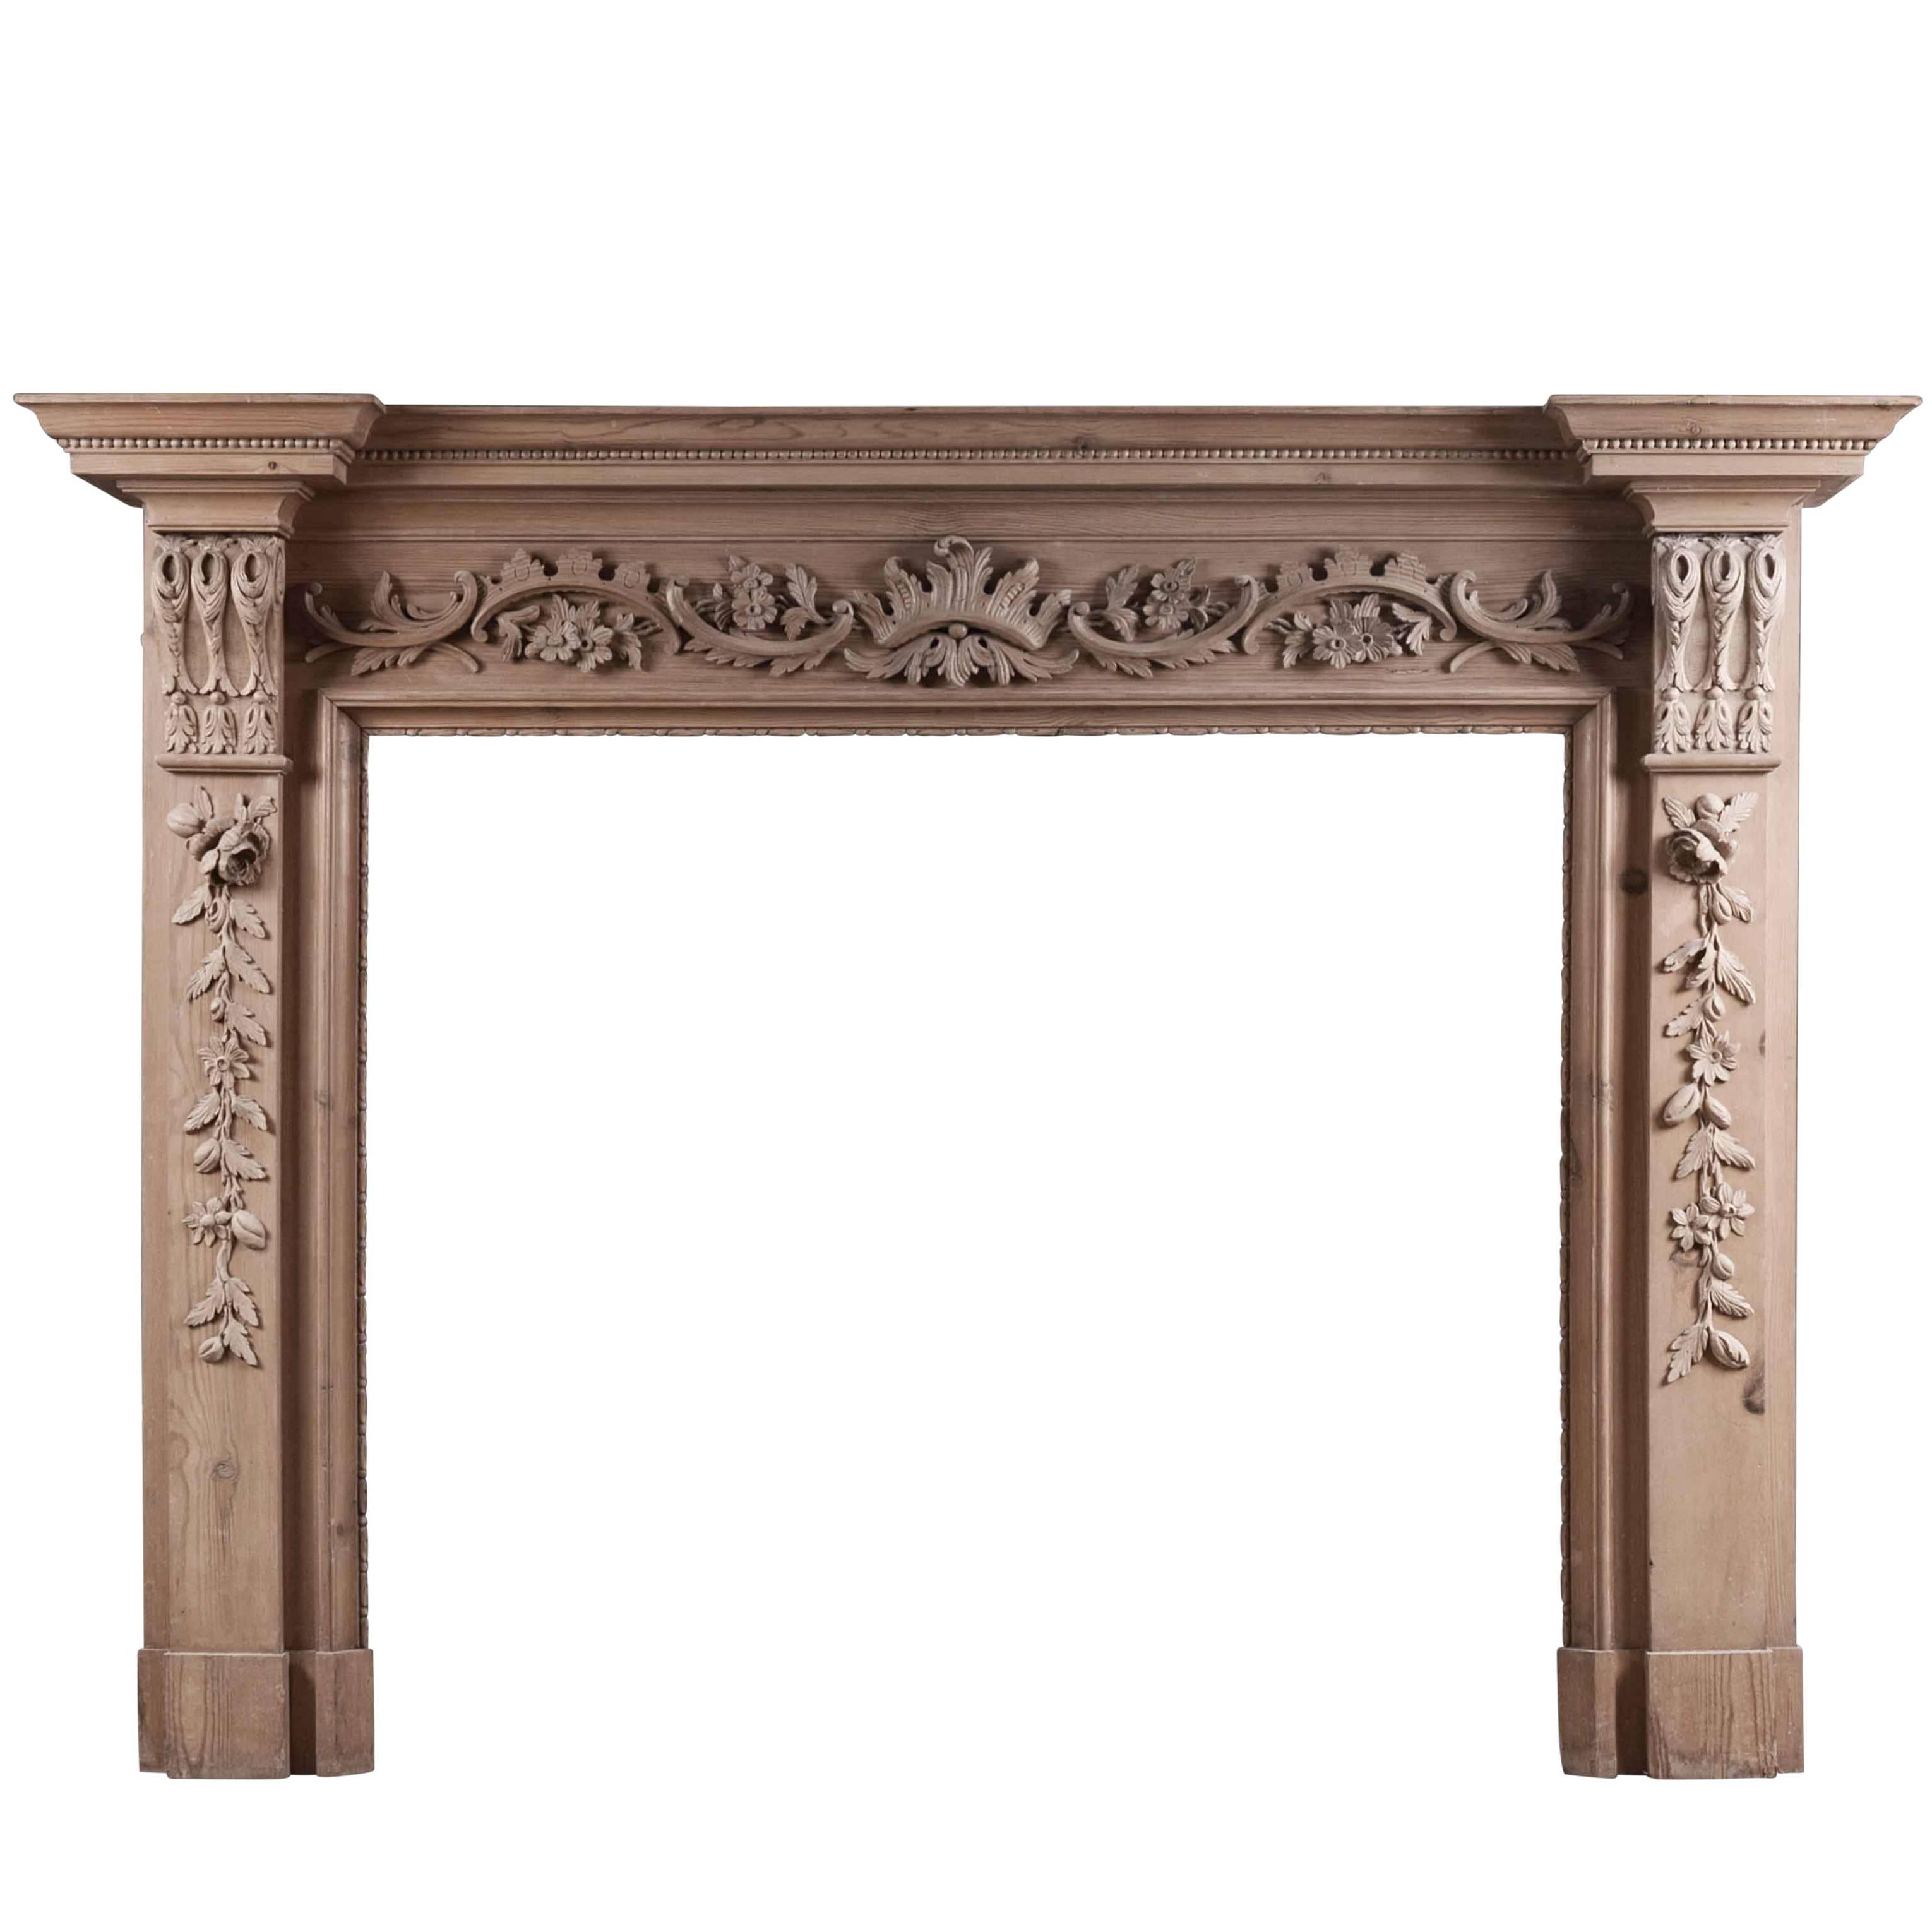 English Pine Fireplace with Carved Fruit & Foliage